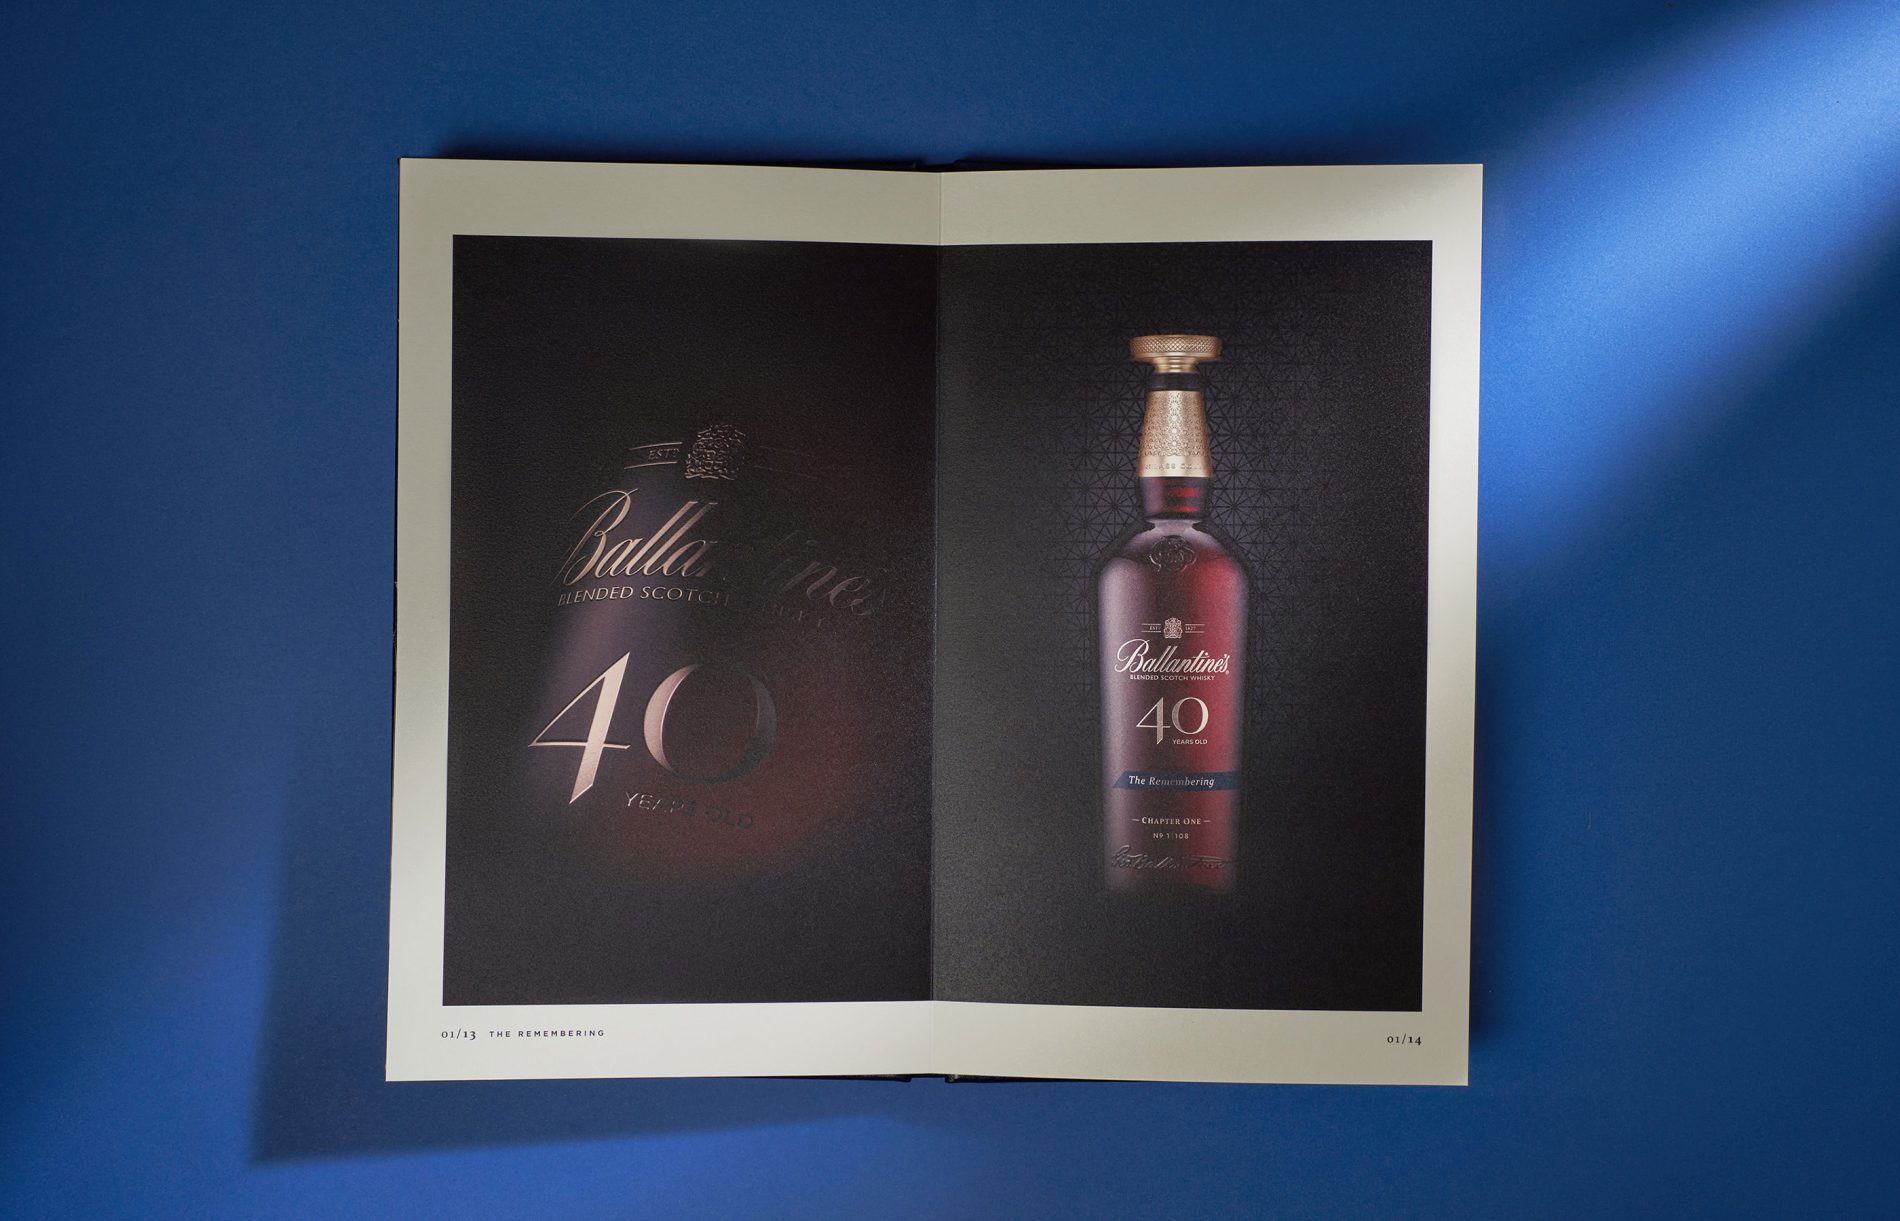 Ballantine's unveils first release of 40 Year Old Masterclass Collection